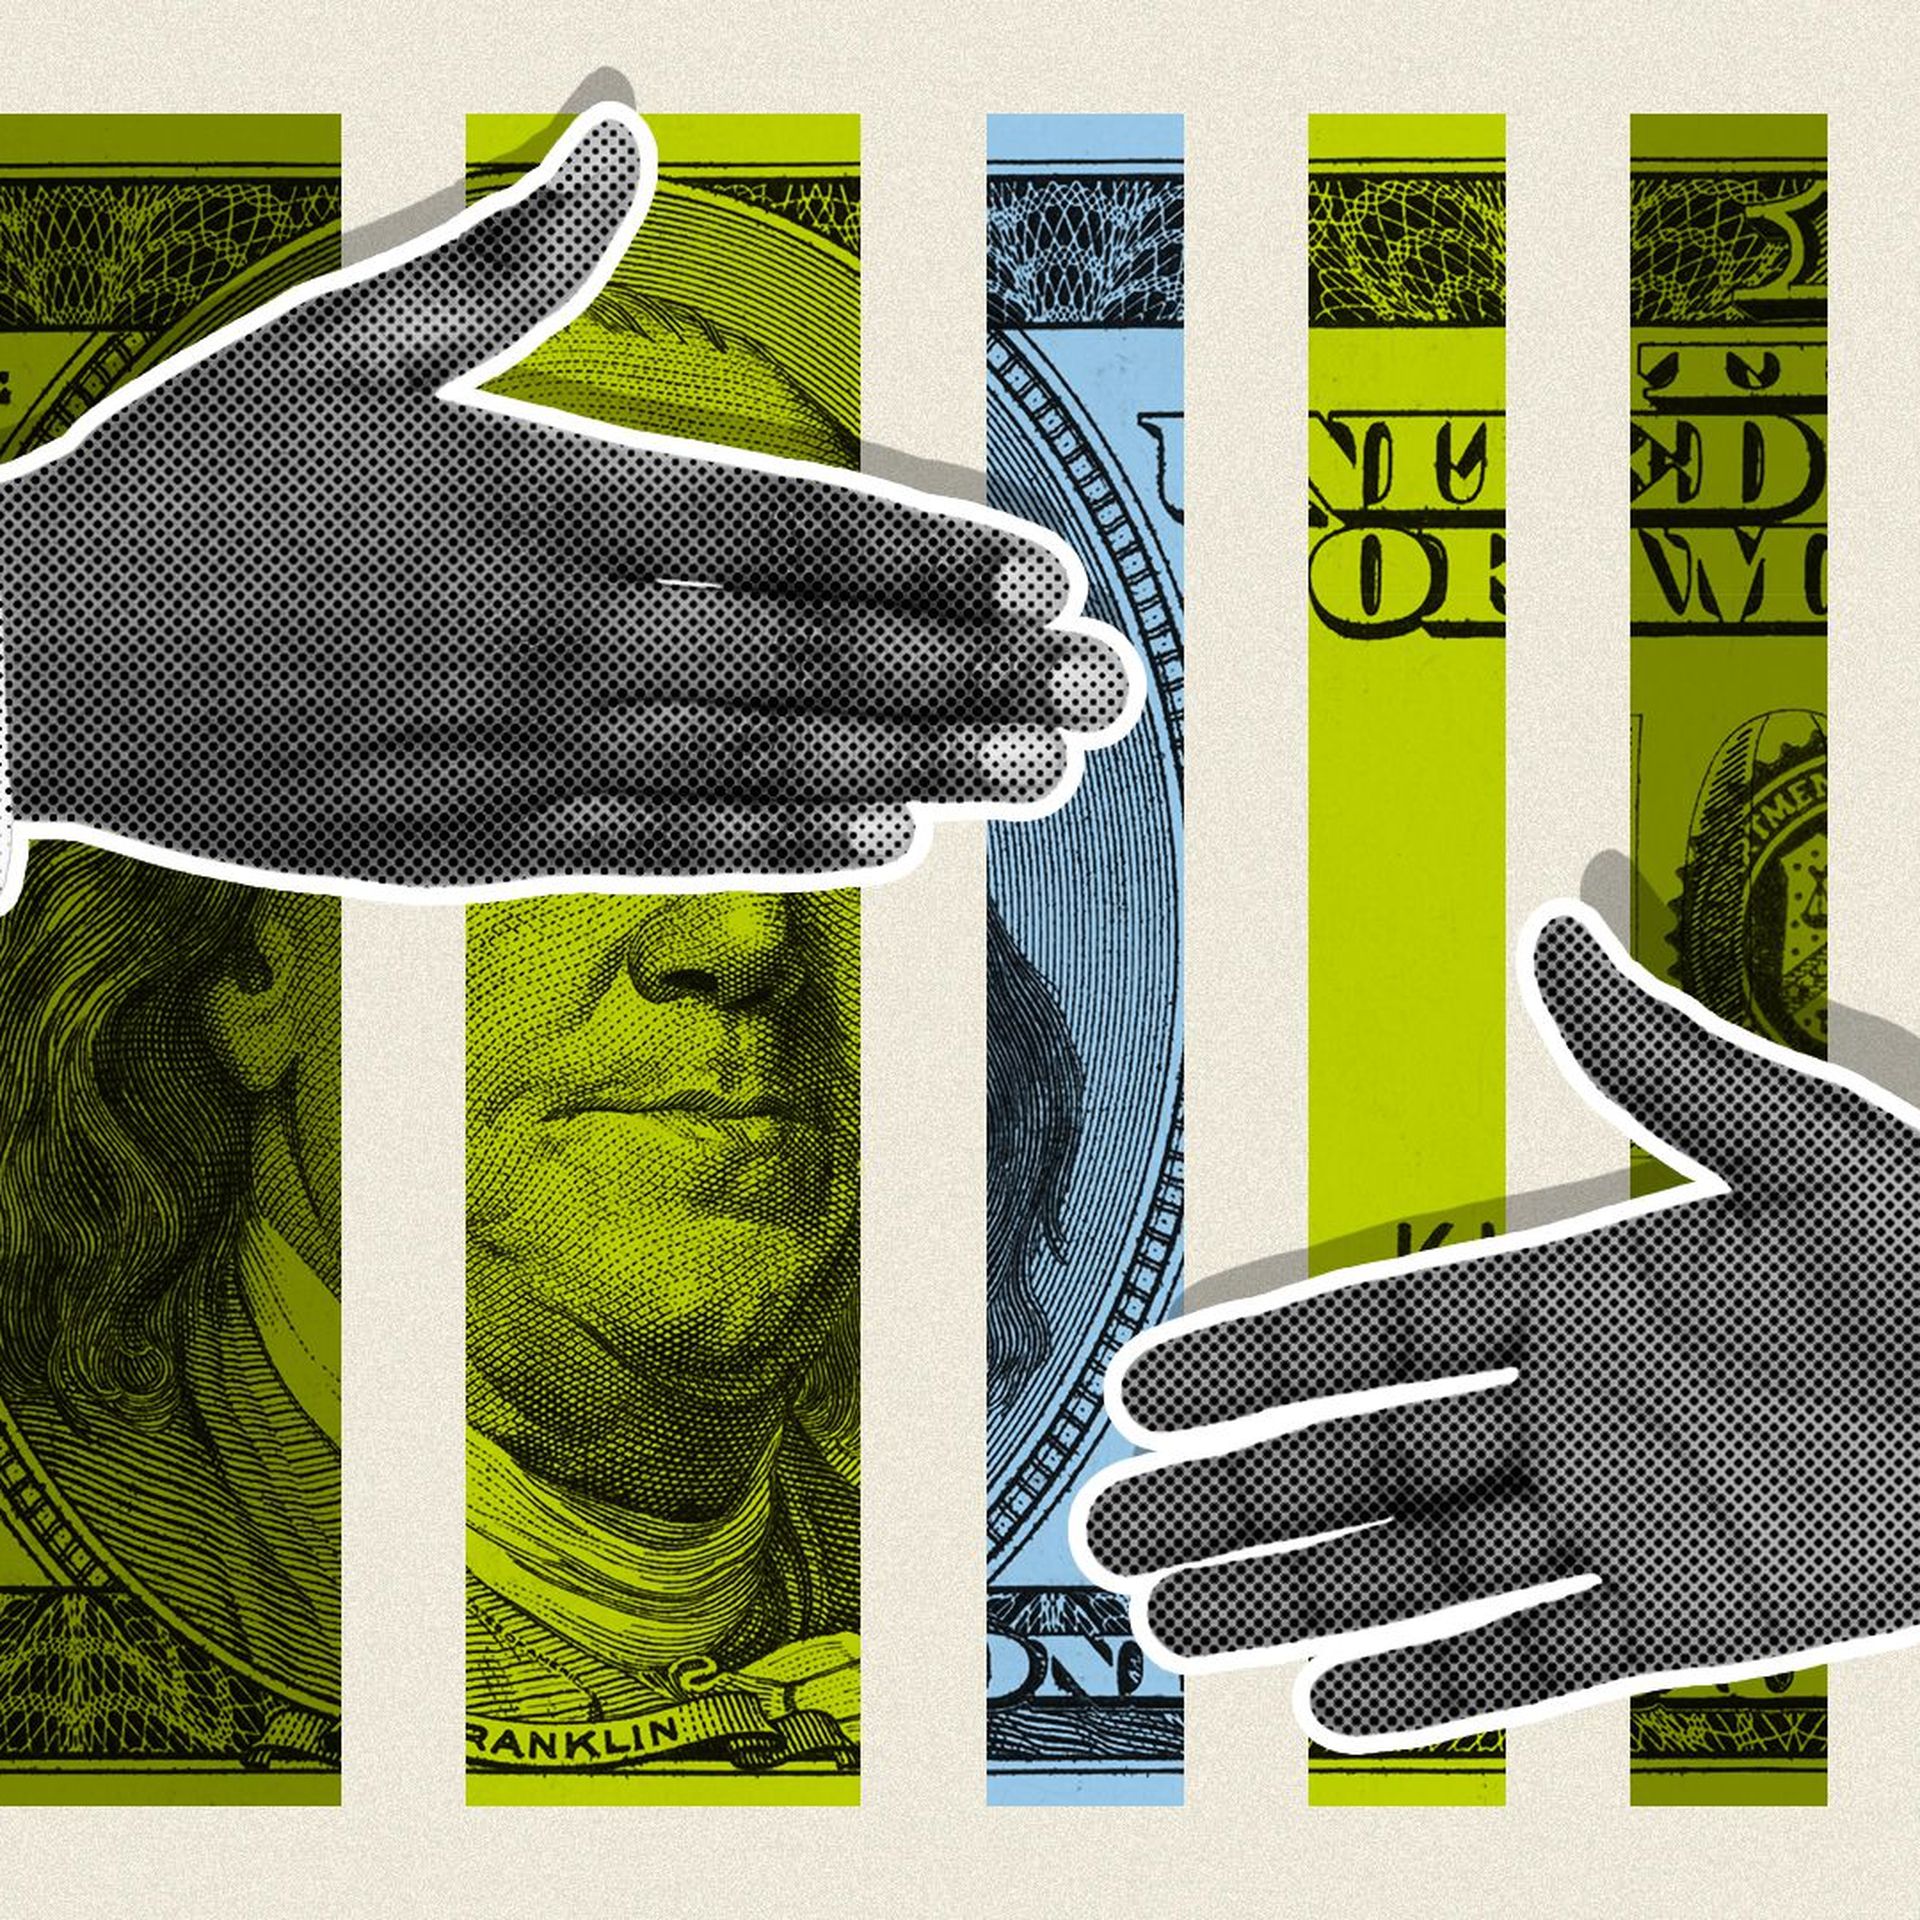 Illustration collage of a handshake over background of hundred dollar bill and rectangles.